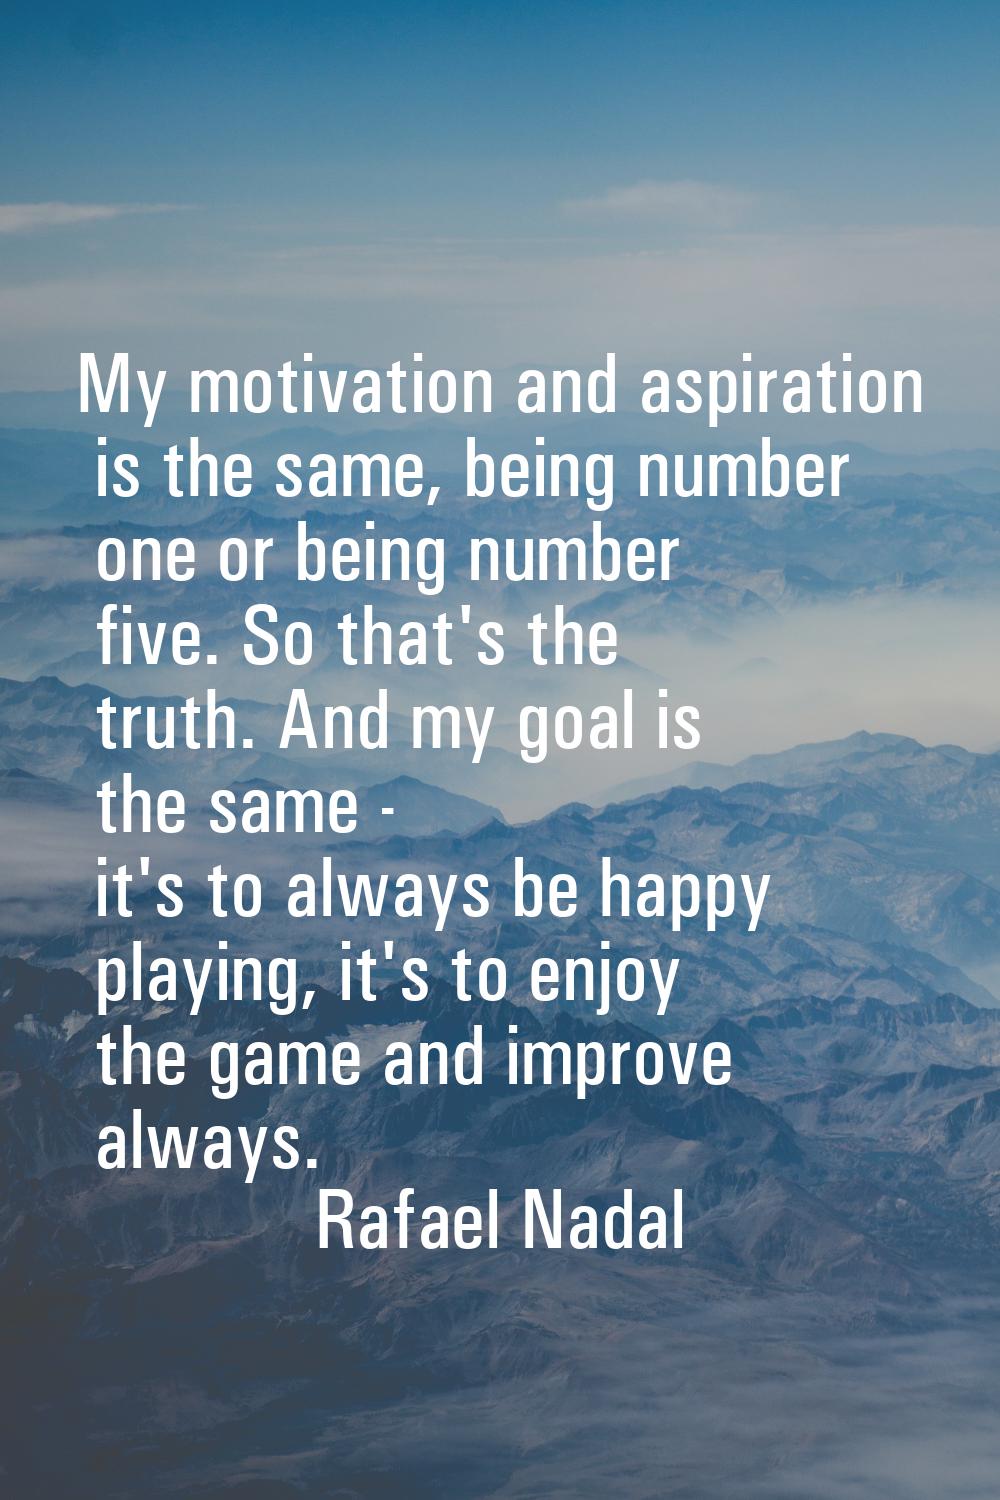 My motivation and aspiration is the same, being number one or being number five. So that's the trut